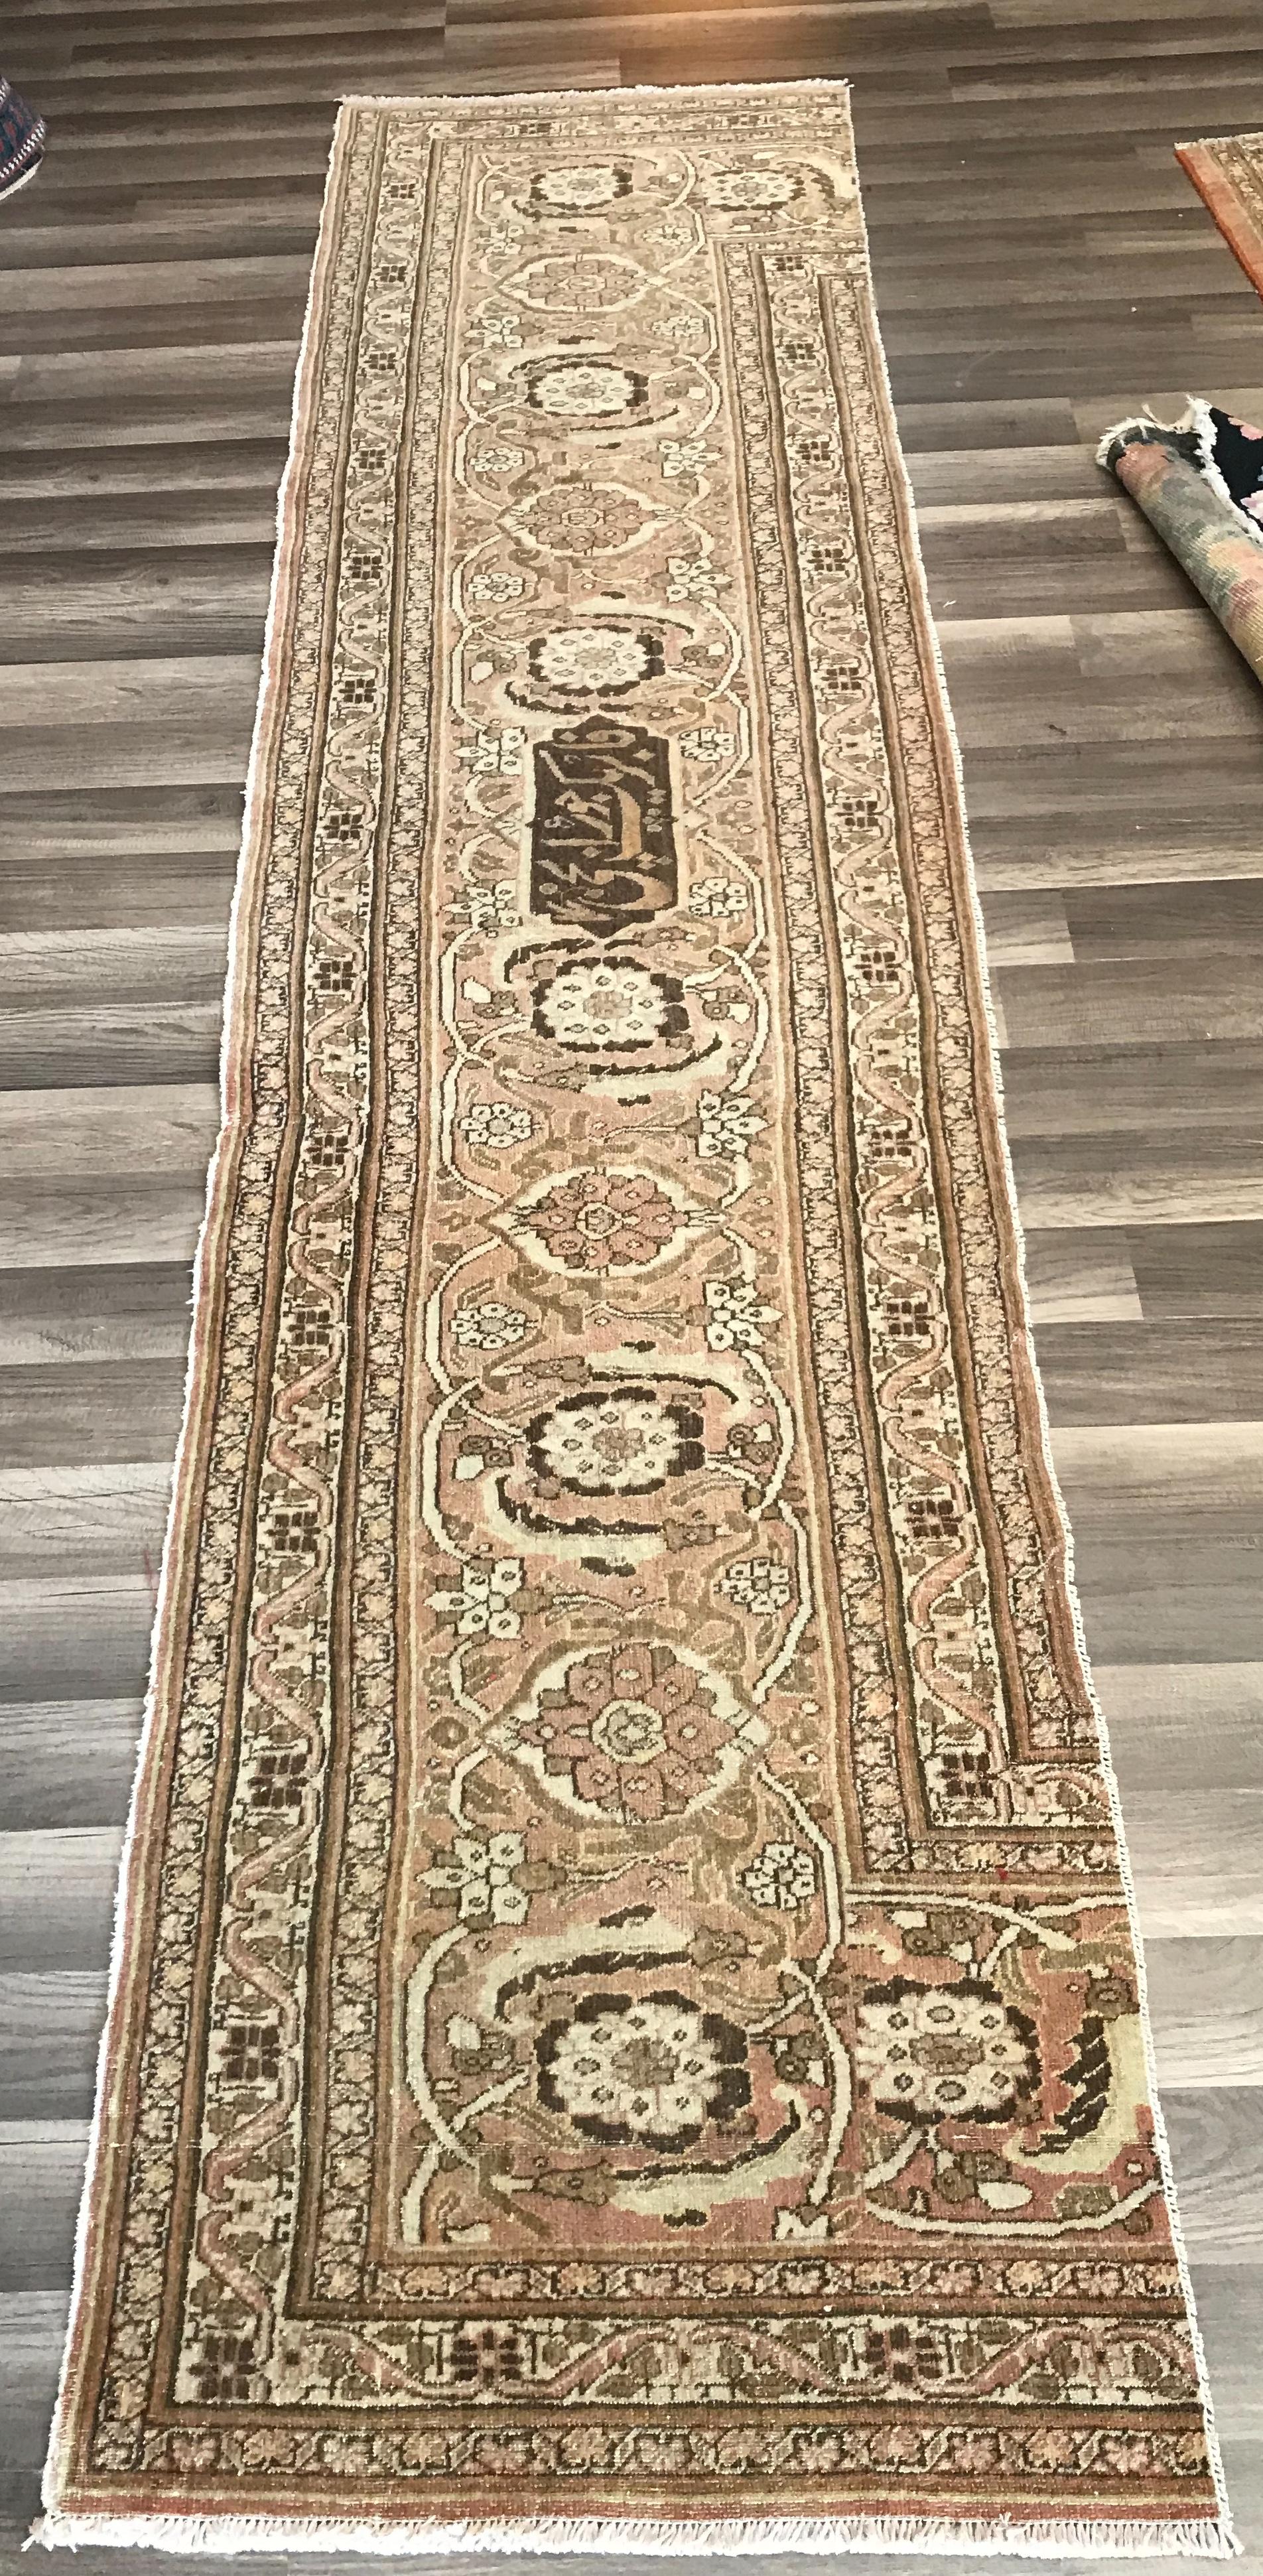 Beautiful antique hand woven Persian rug fragment with the signature of the rug maker family on it, very muted soft colors of flowers and vines motifs all around. This piece of woven art was part of a very large rug that during time got damage in